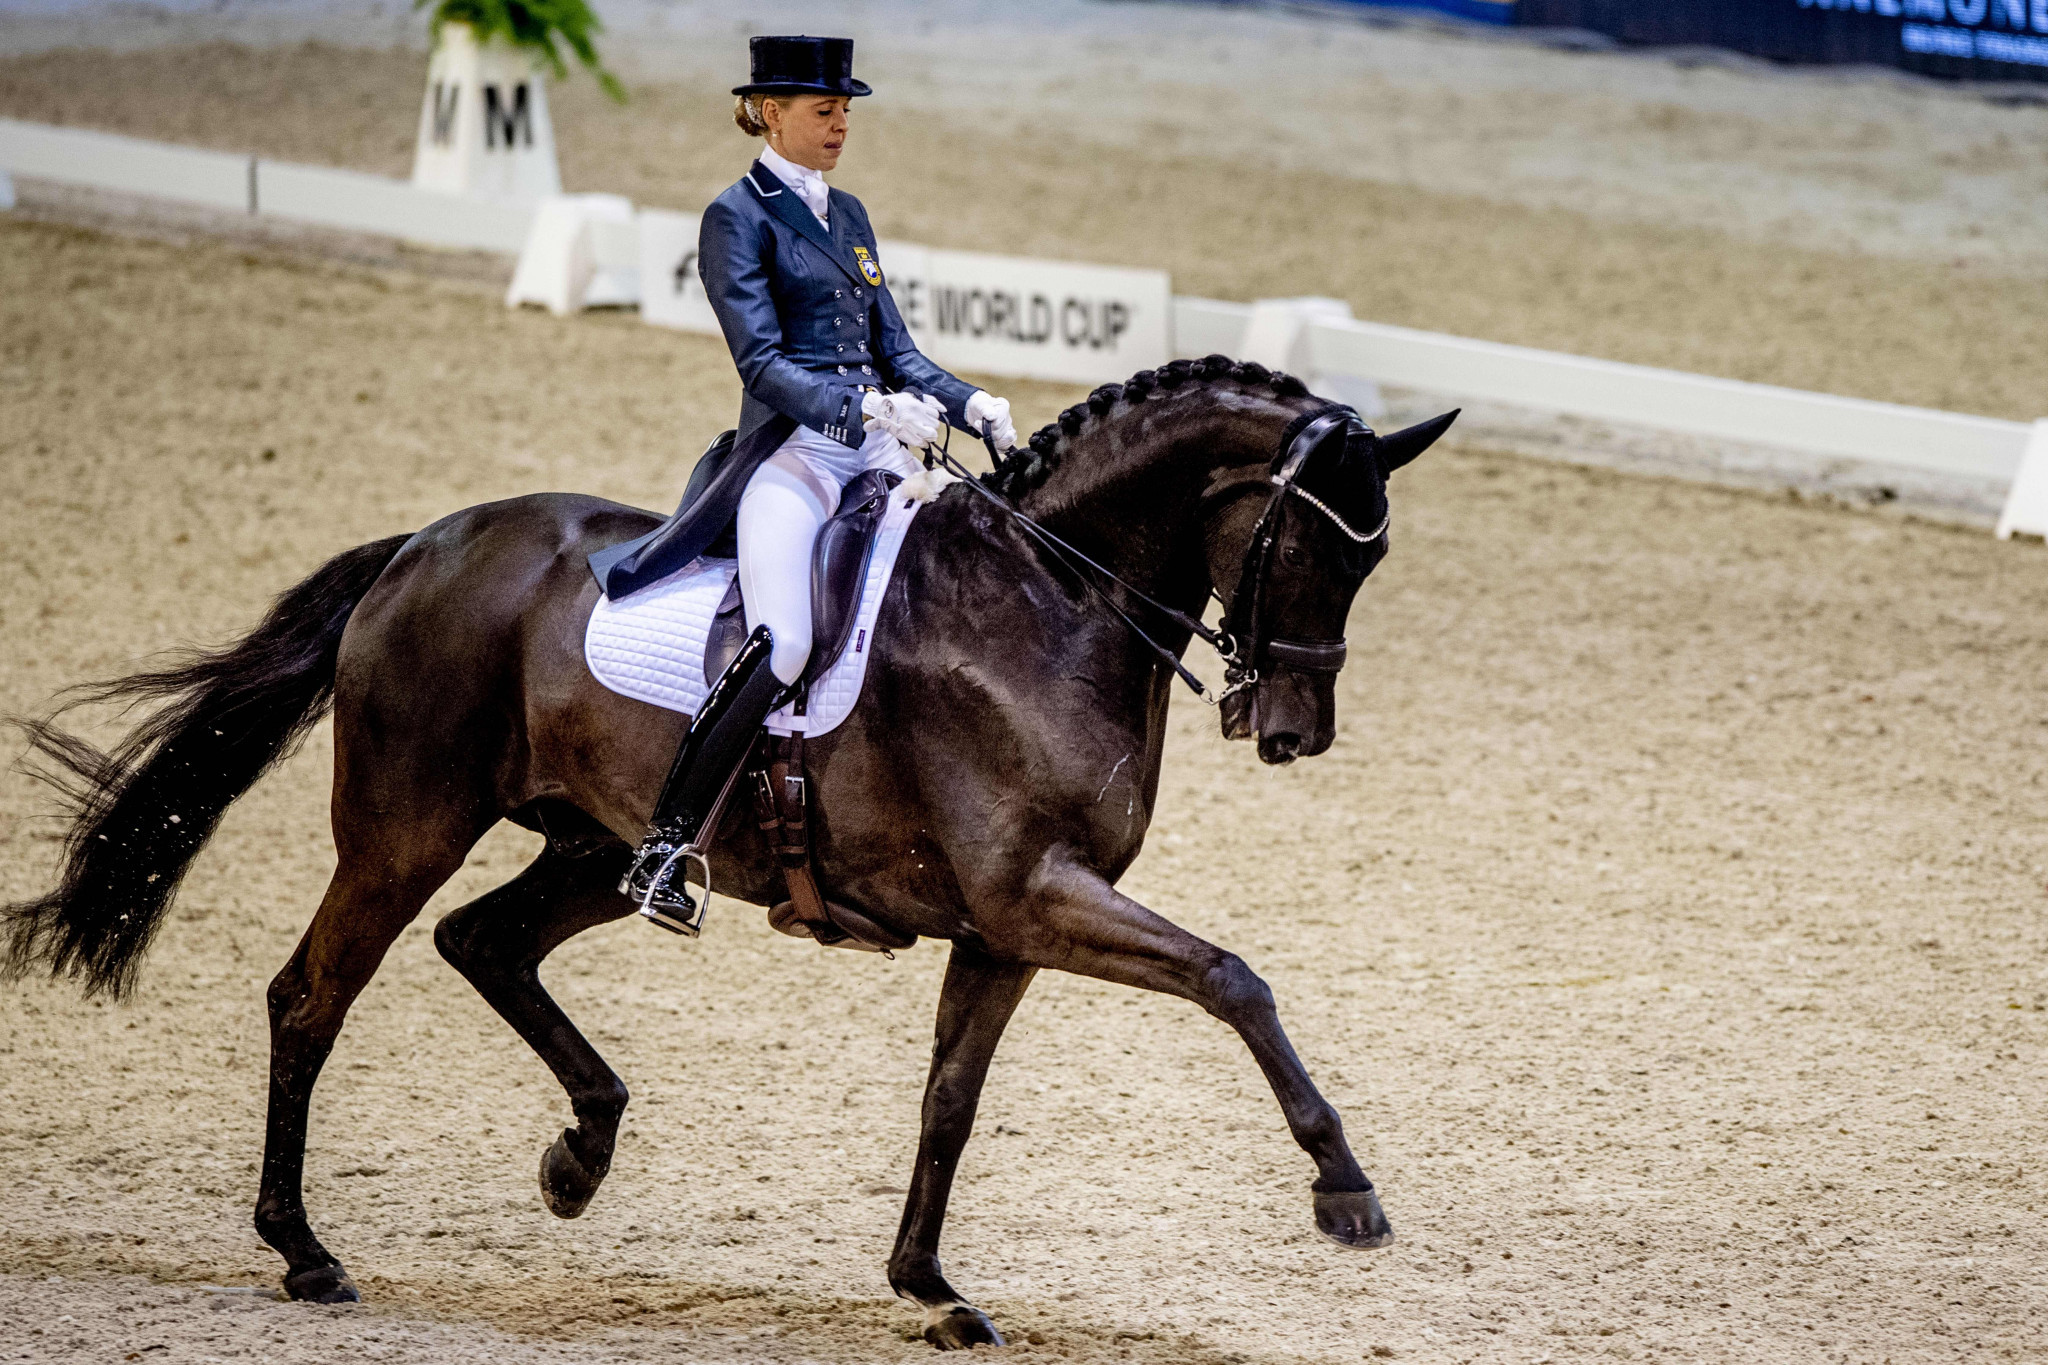 Sweden's Antonia Ramel will be among those seeking to maintain the overall lead in the FEI Dressage Nations Cup that starts in Aachen tomorrow ©Getty Images